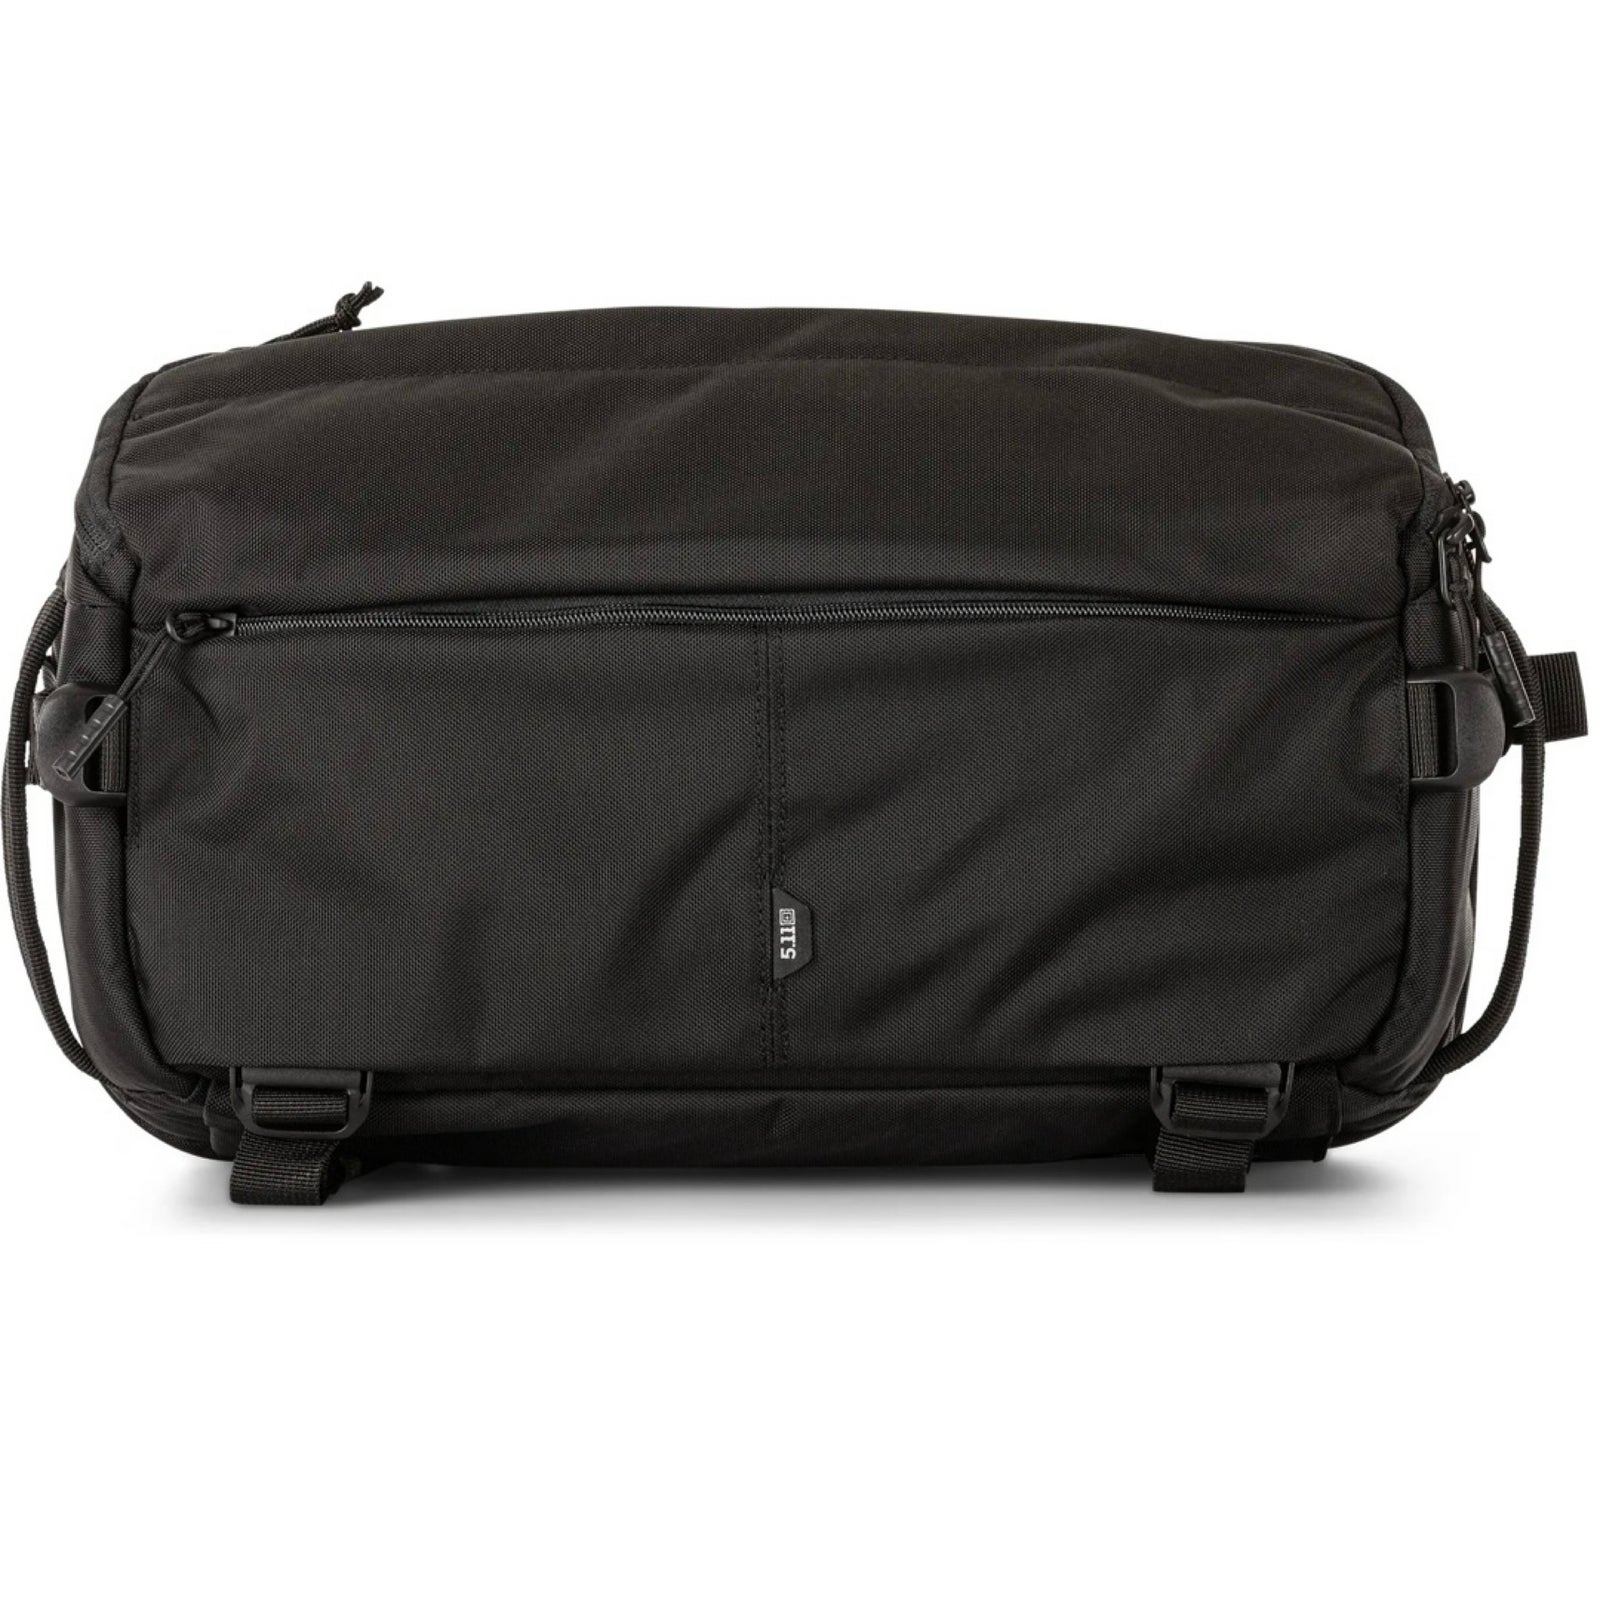 Andet, 5.11 Tactical